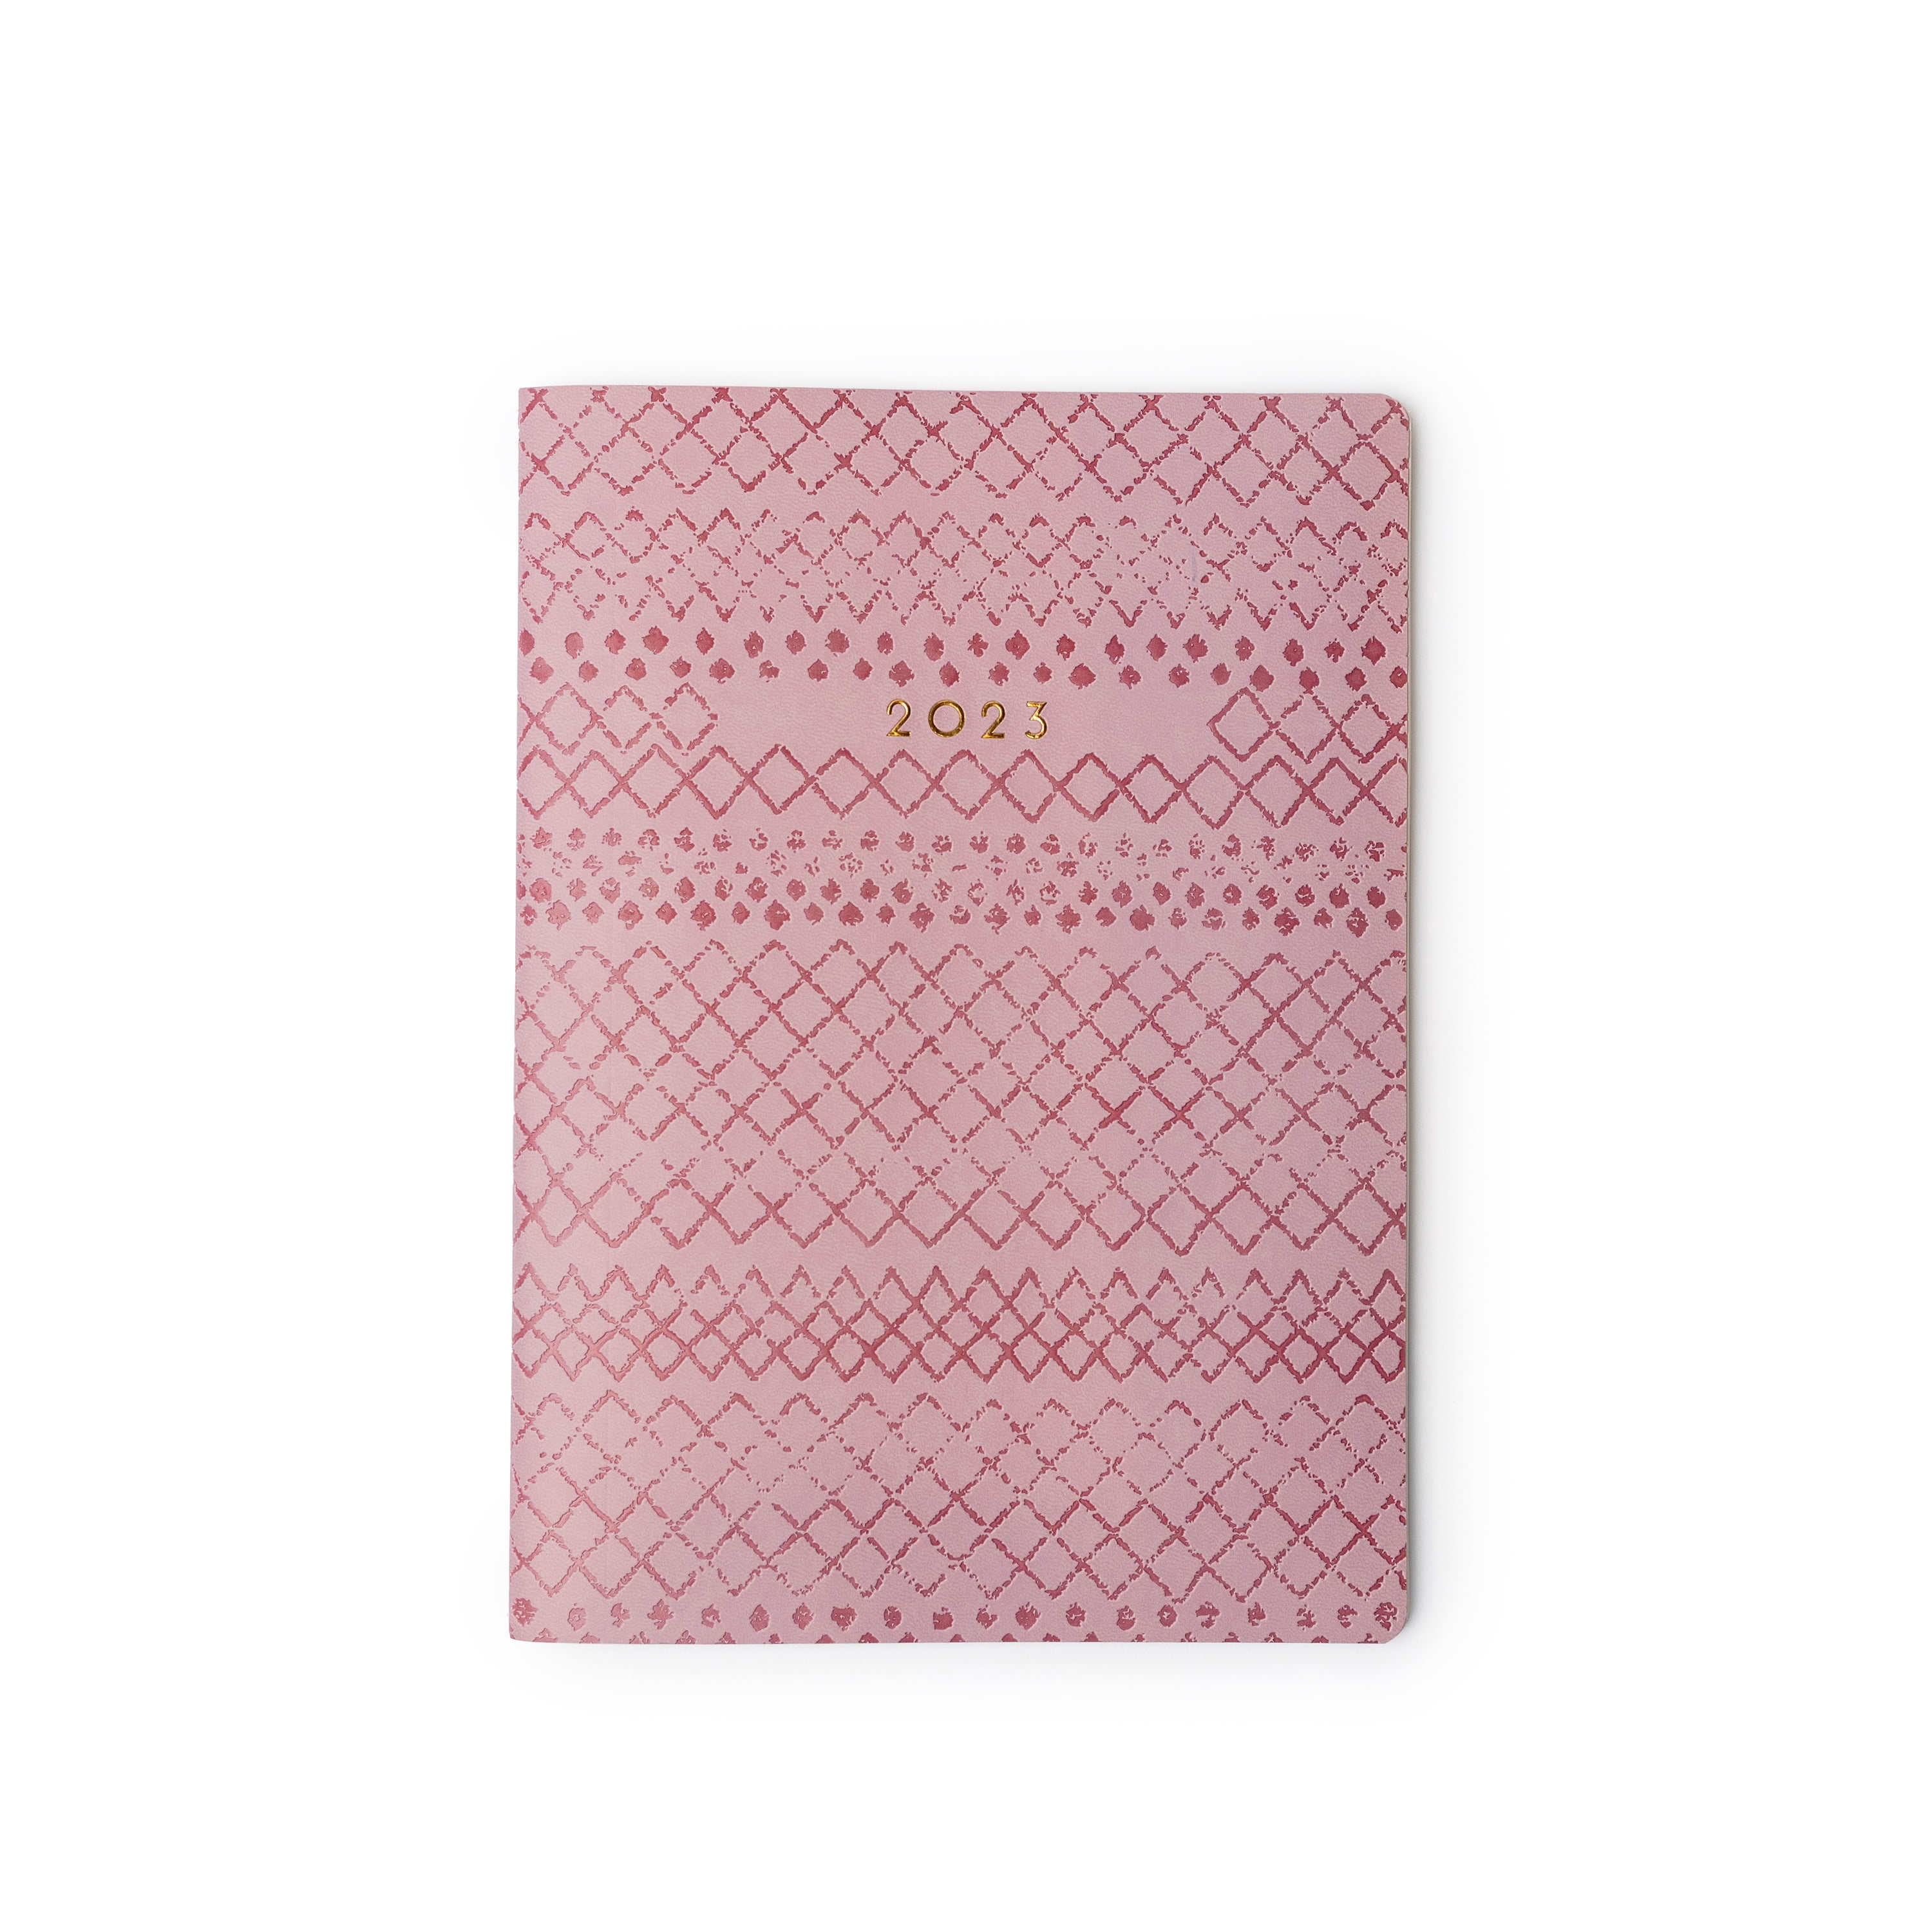 2023 Leatherette Monthly Planner 7" x 9.75" Pink Global Geo Blush by Pen+Gear